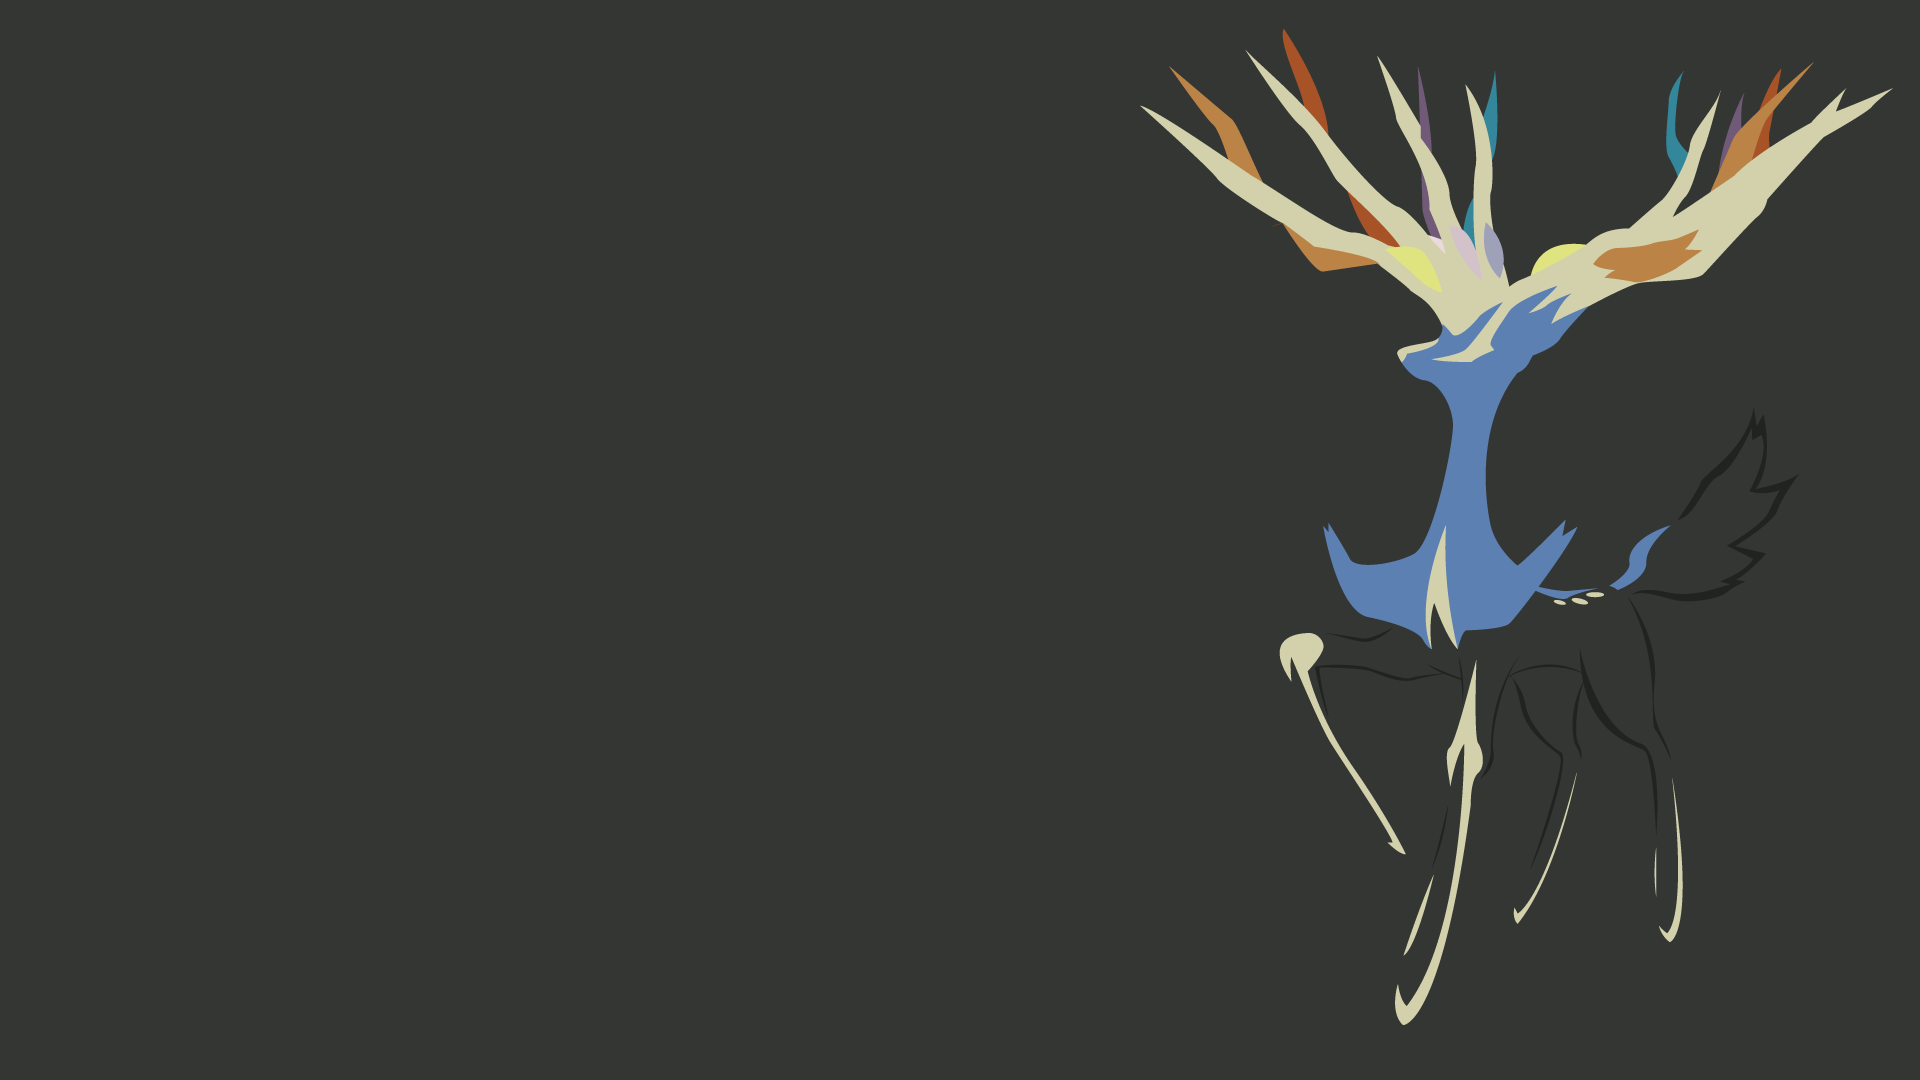 Pokemon: X and Y Wallpapers